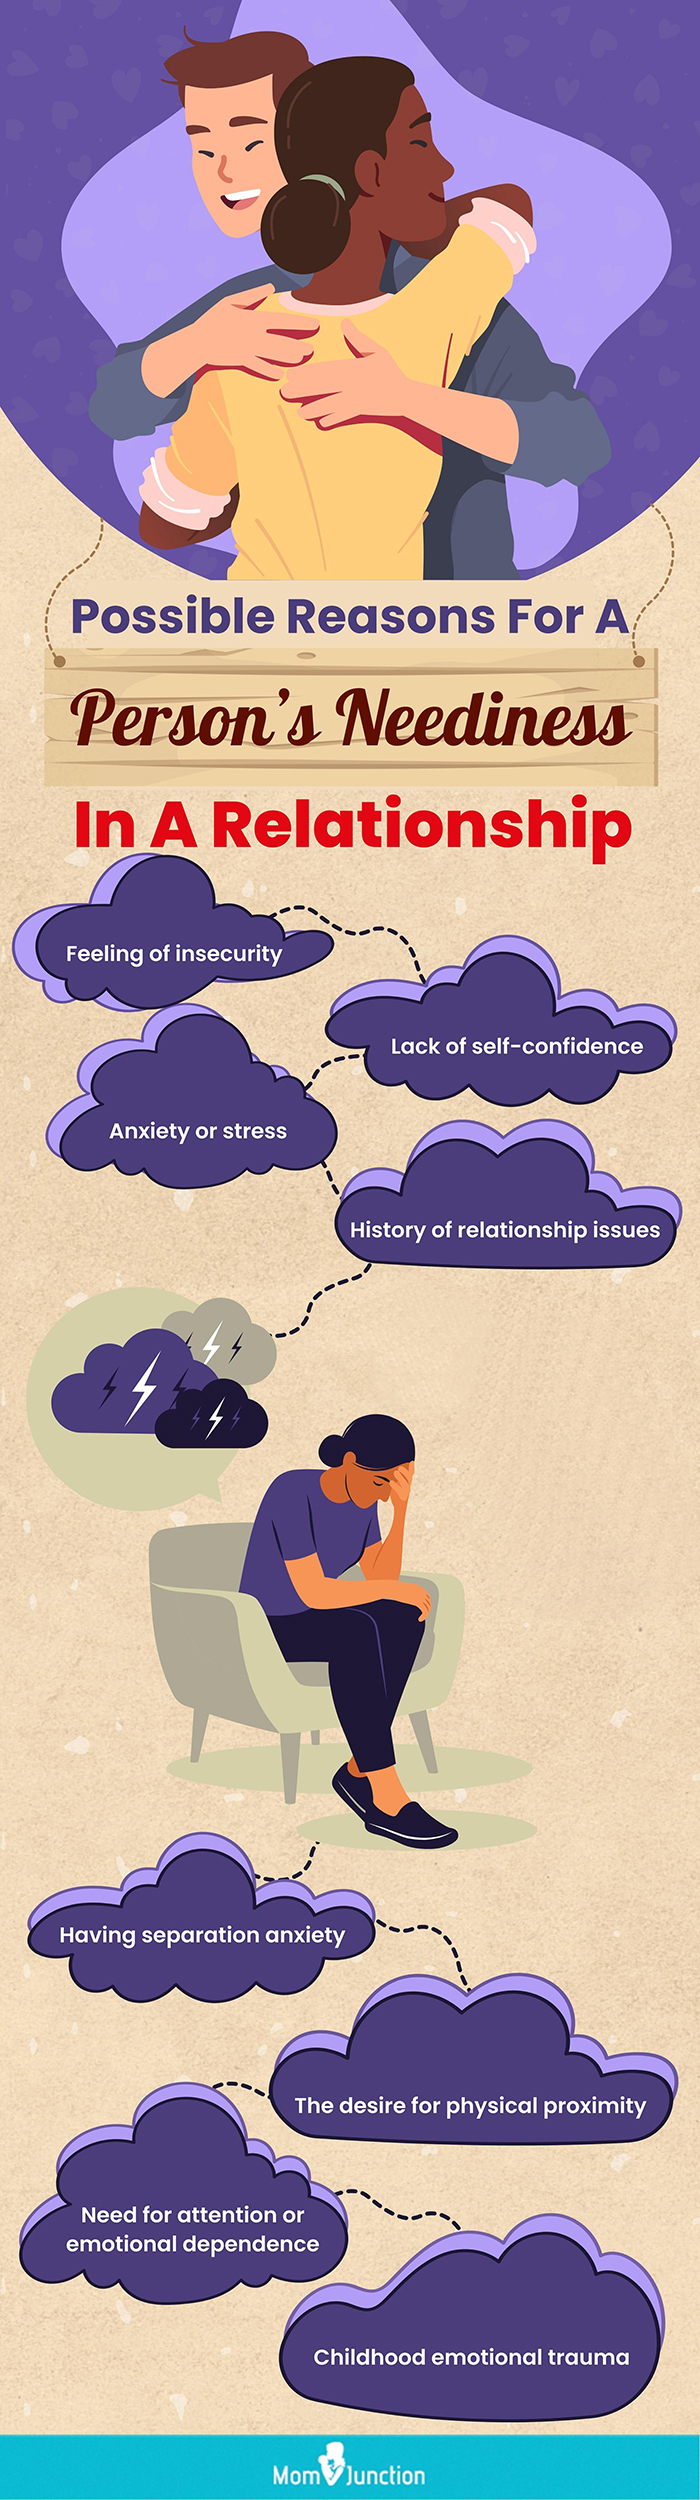 reasons for a persons neediness in a relationship (infographic)